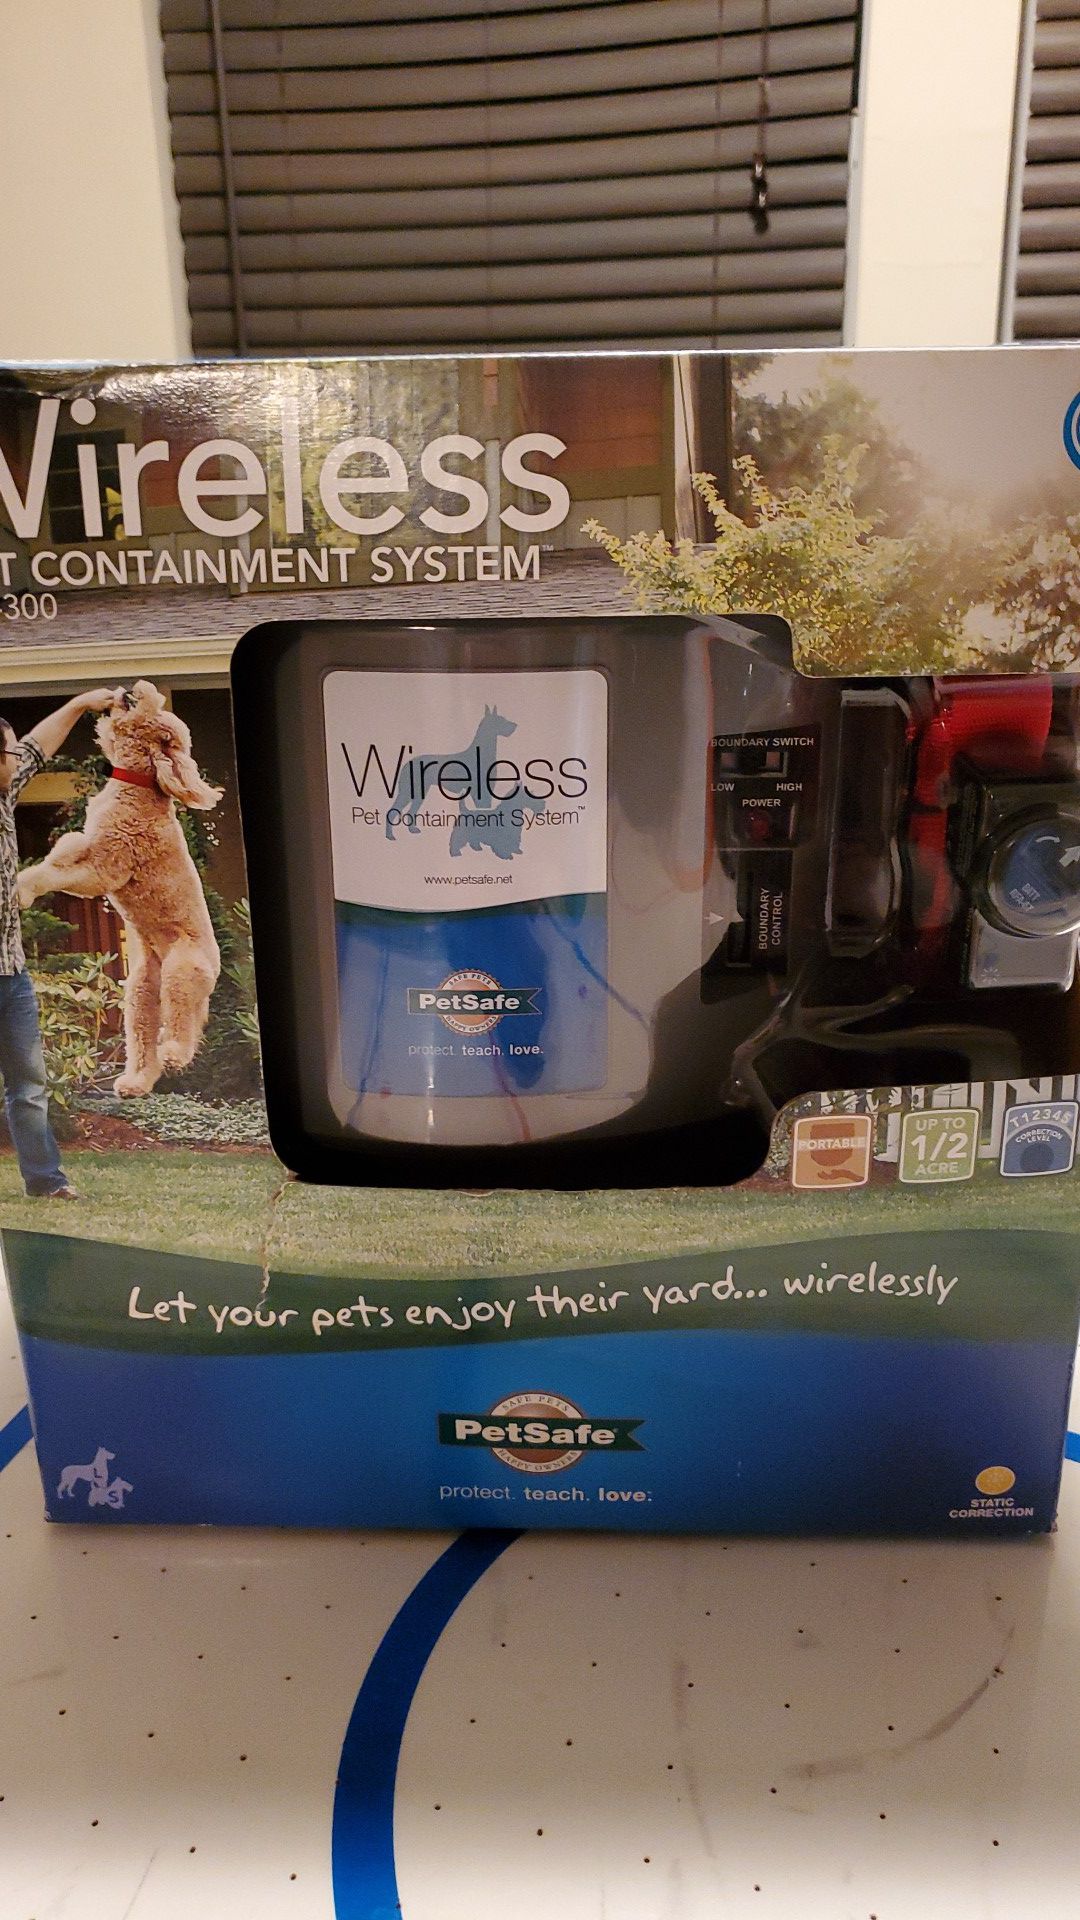 Petsafe,wireless pet containment system